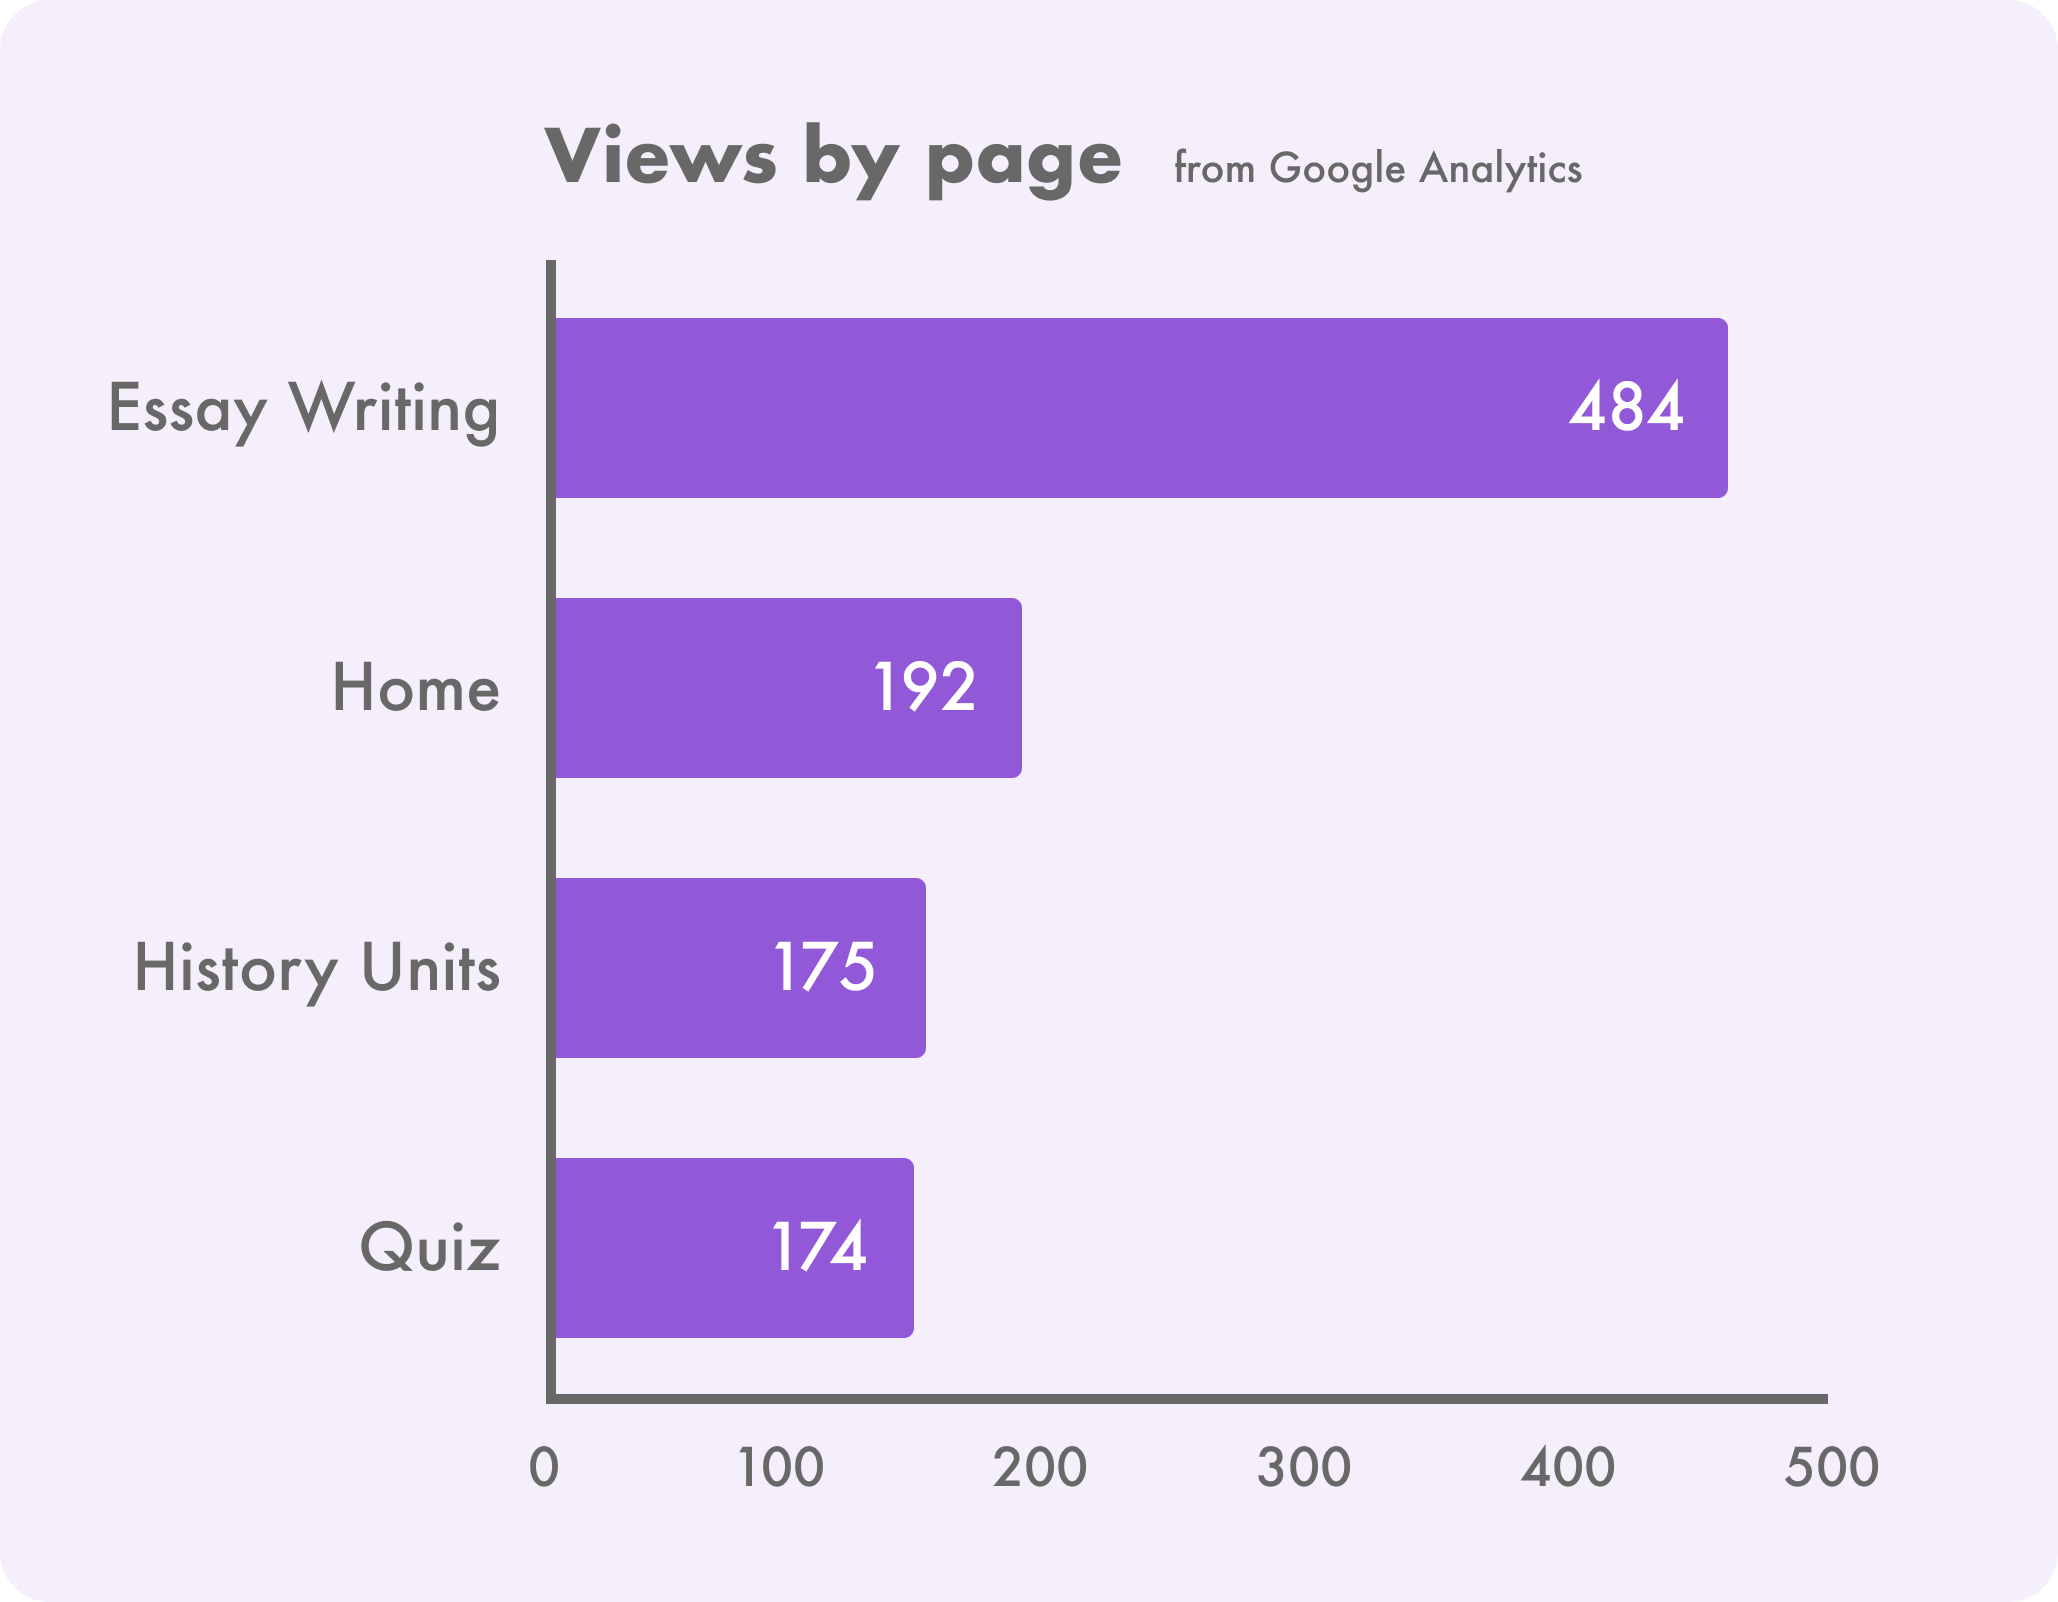 Essay writing has the highest page views on Engram